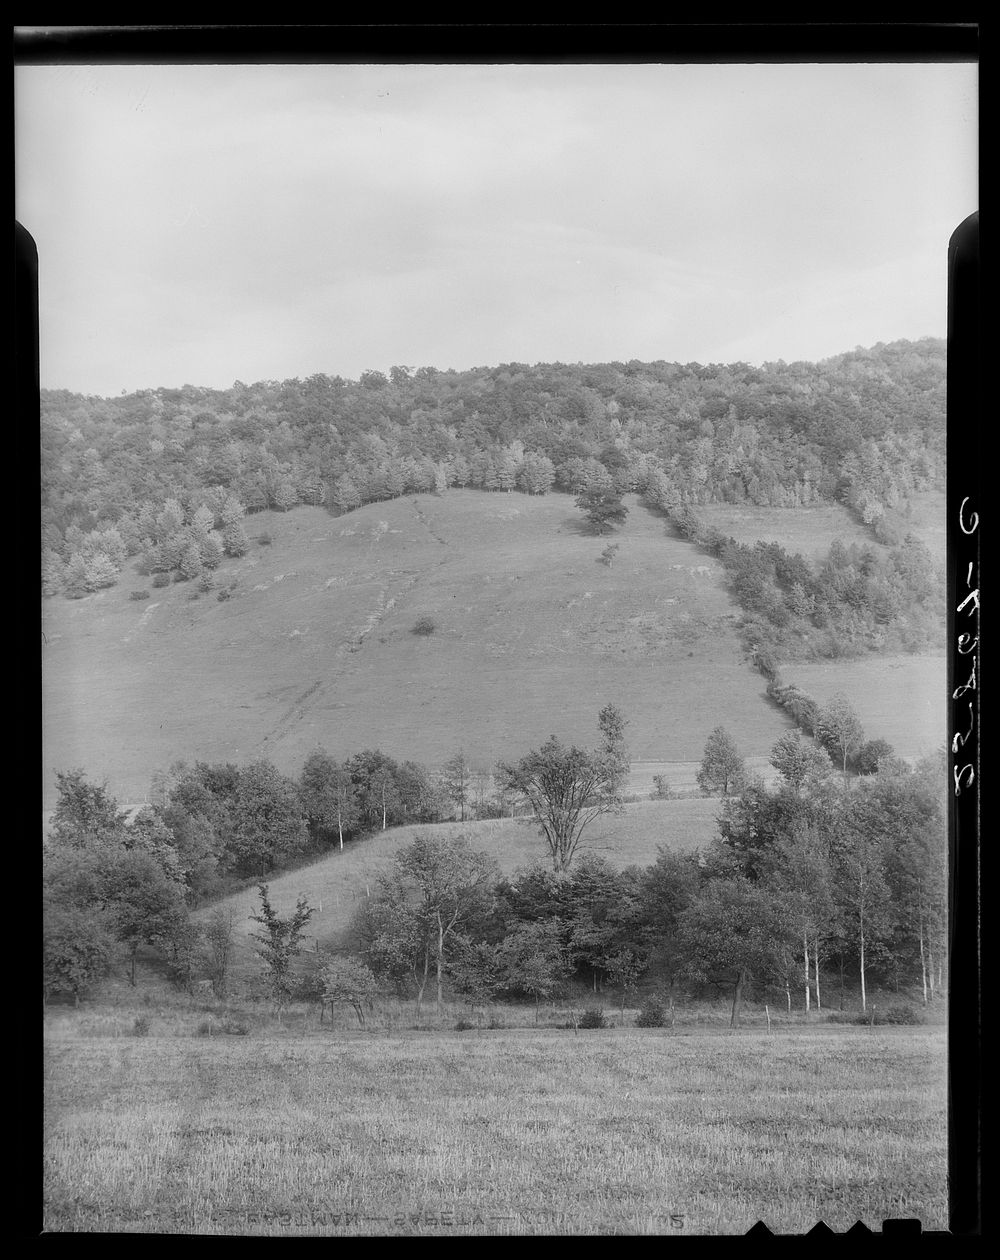 Erosion. Otsego County, New York. Sourced from the Library of Congress.